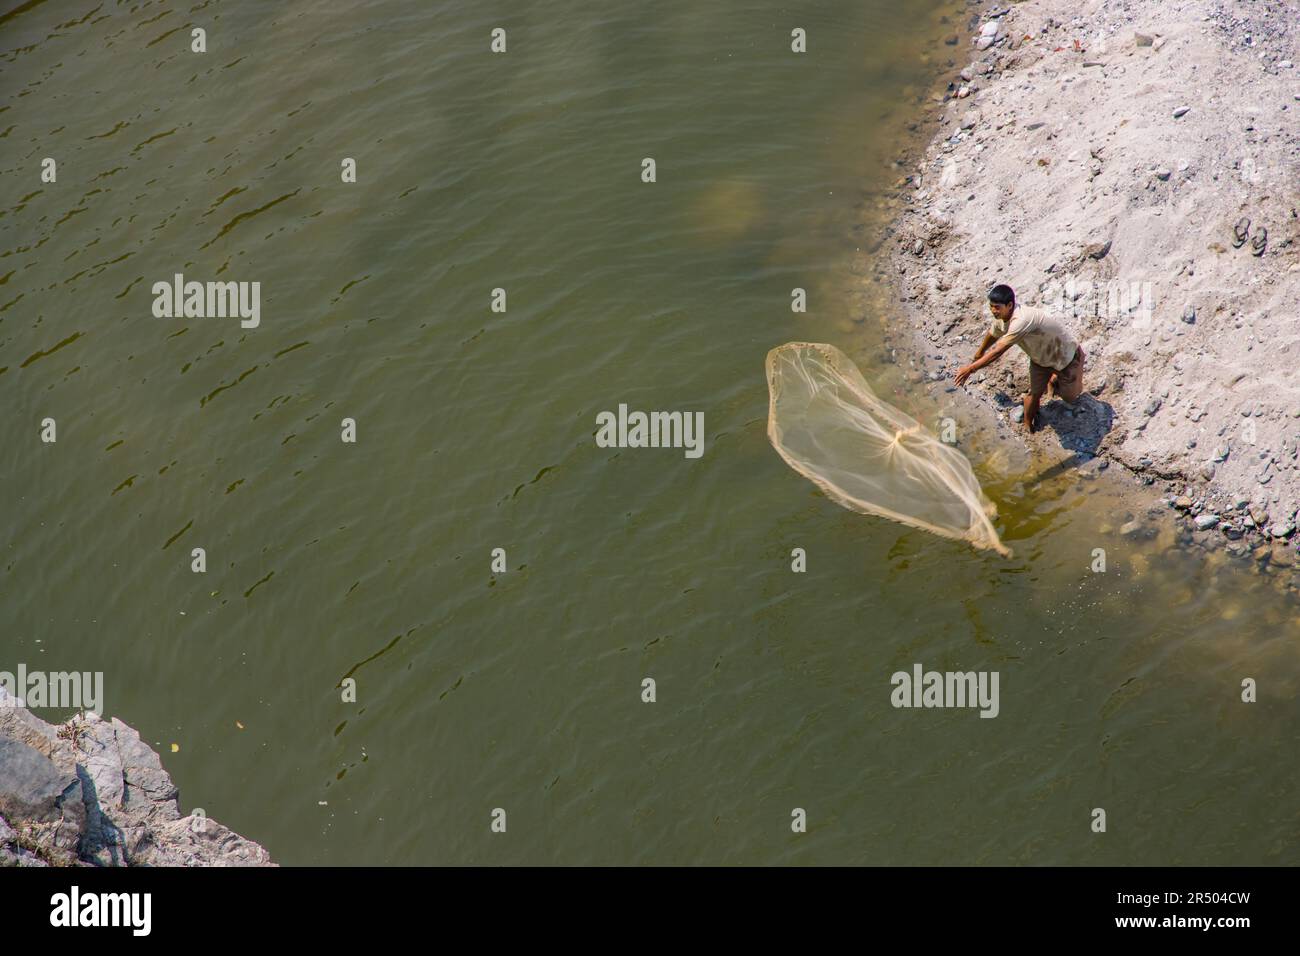 https://c8.alamy.com/comp/2R504CW/traditional-fishing-fisherman-throwing-net-on-river-to-catch-fish-in-nepal-2R504CW.jpg